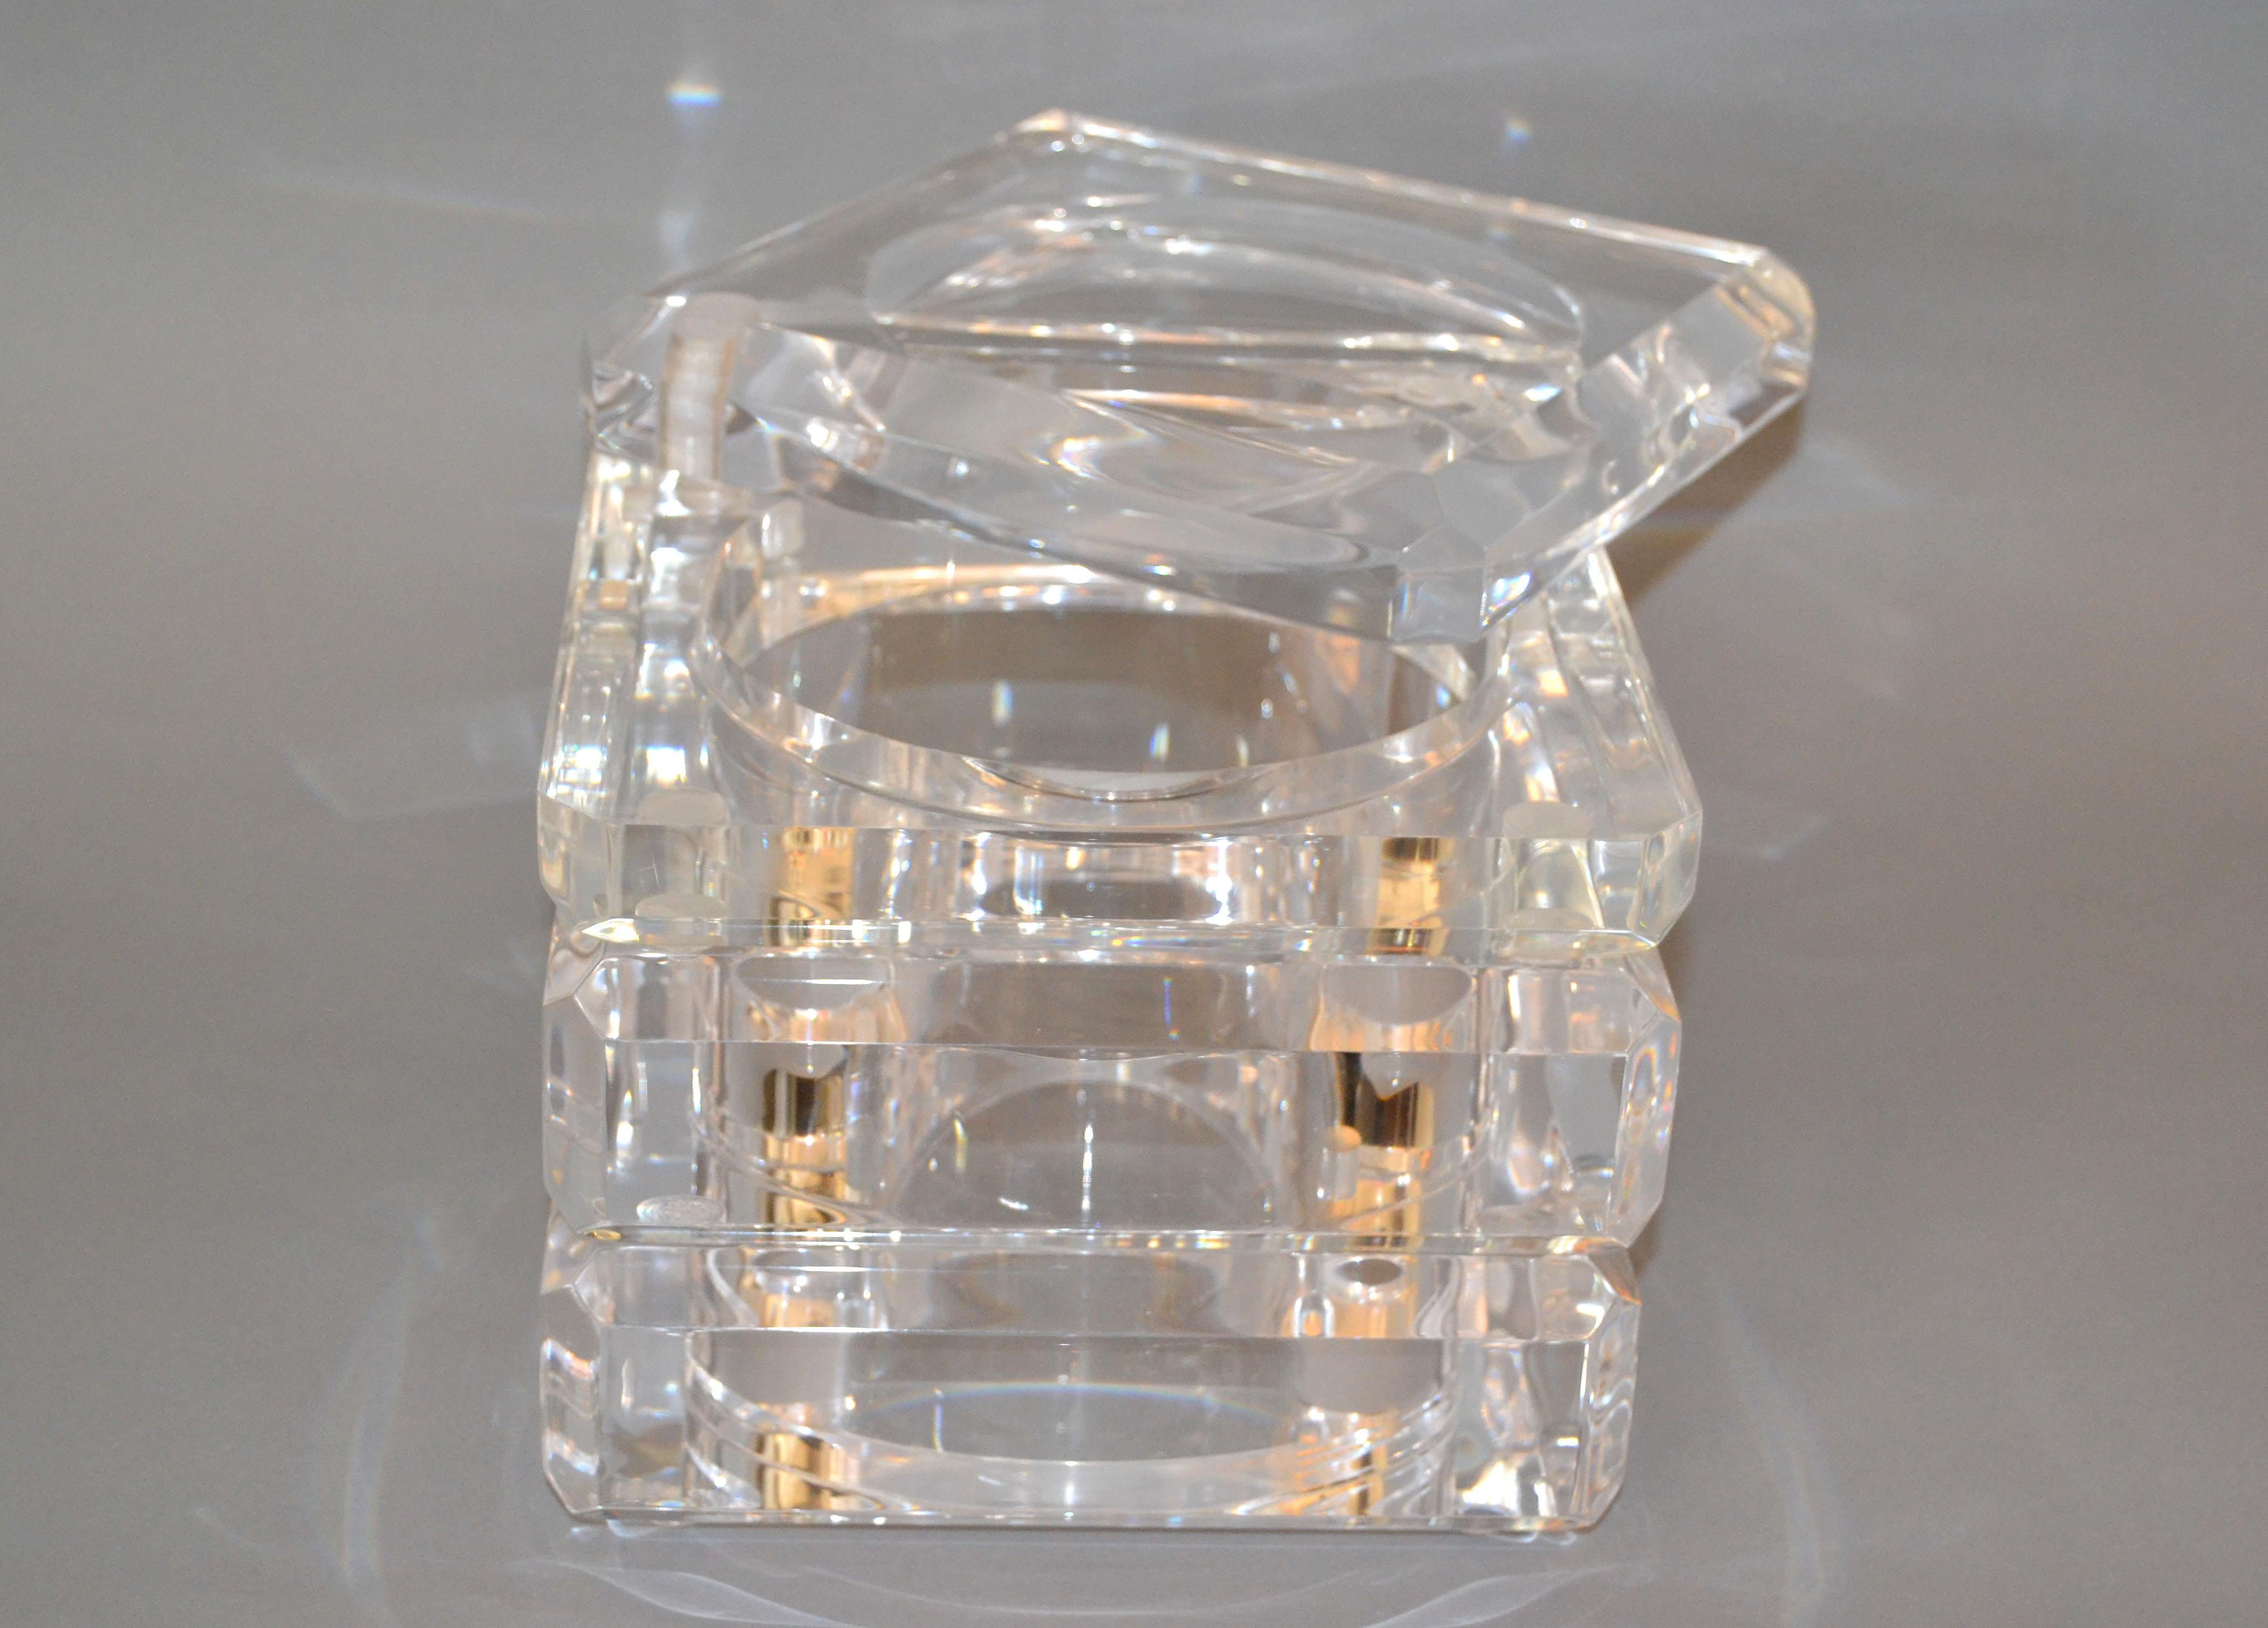 Mid-Century Modern finely detailed ice bucket in Lucite.
The tight fitted lid swings open and is attached to the bucket.
It is made out of very thick Lucite and is heavy.